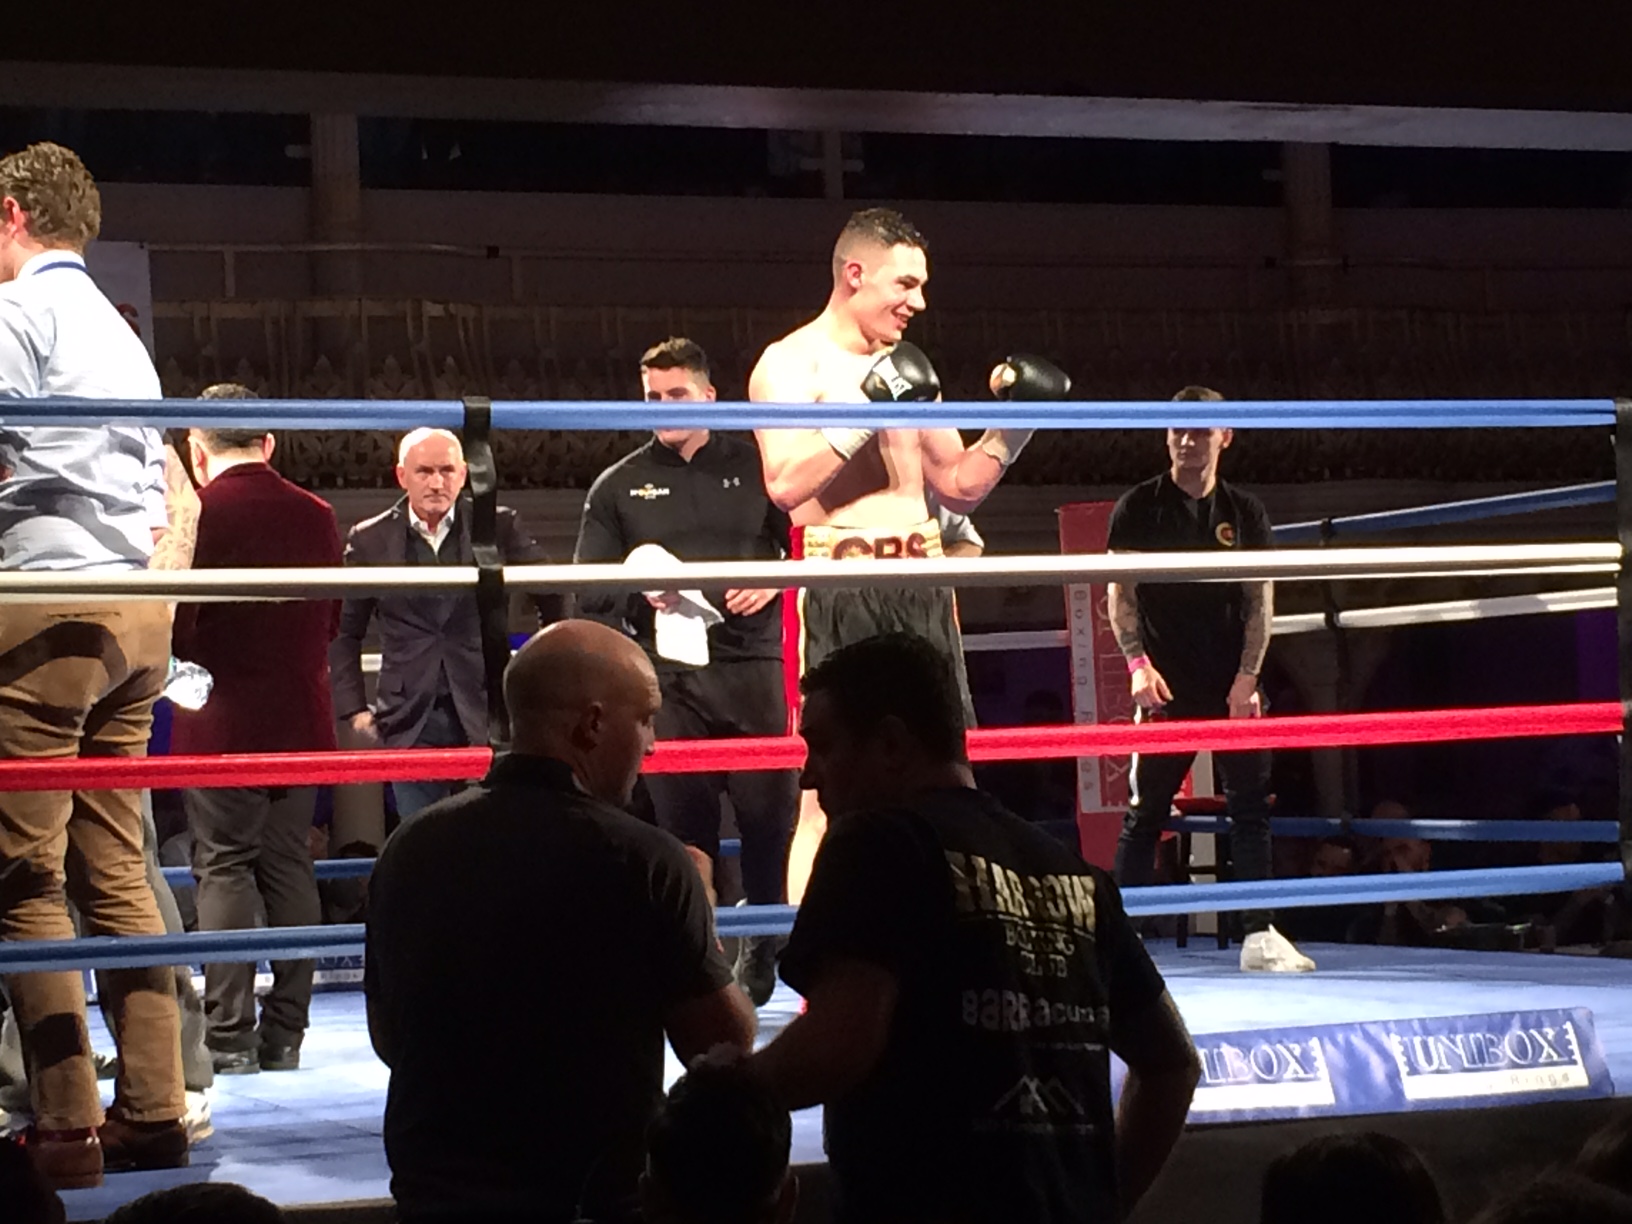 Billam-Smith cruised to a 5th round stoppage win in March